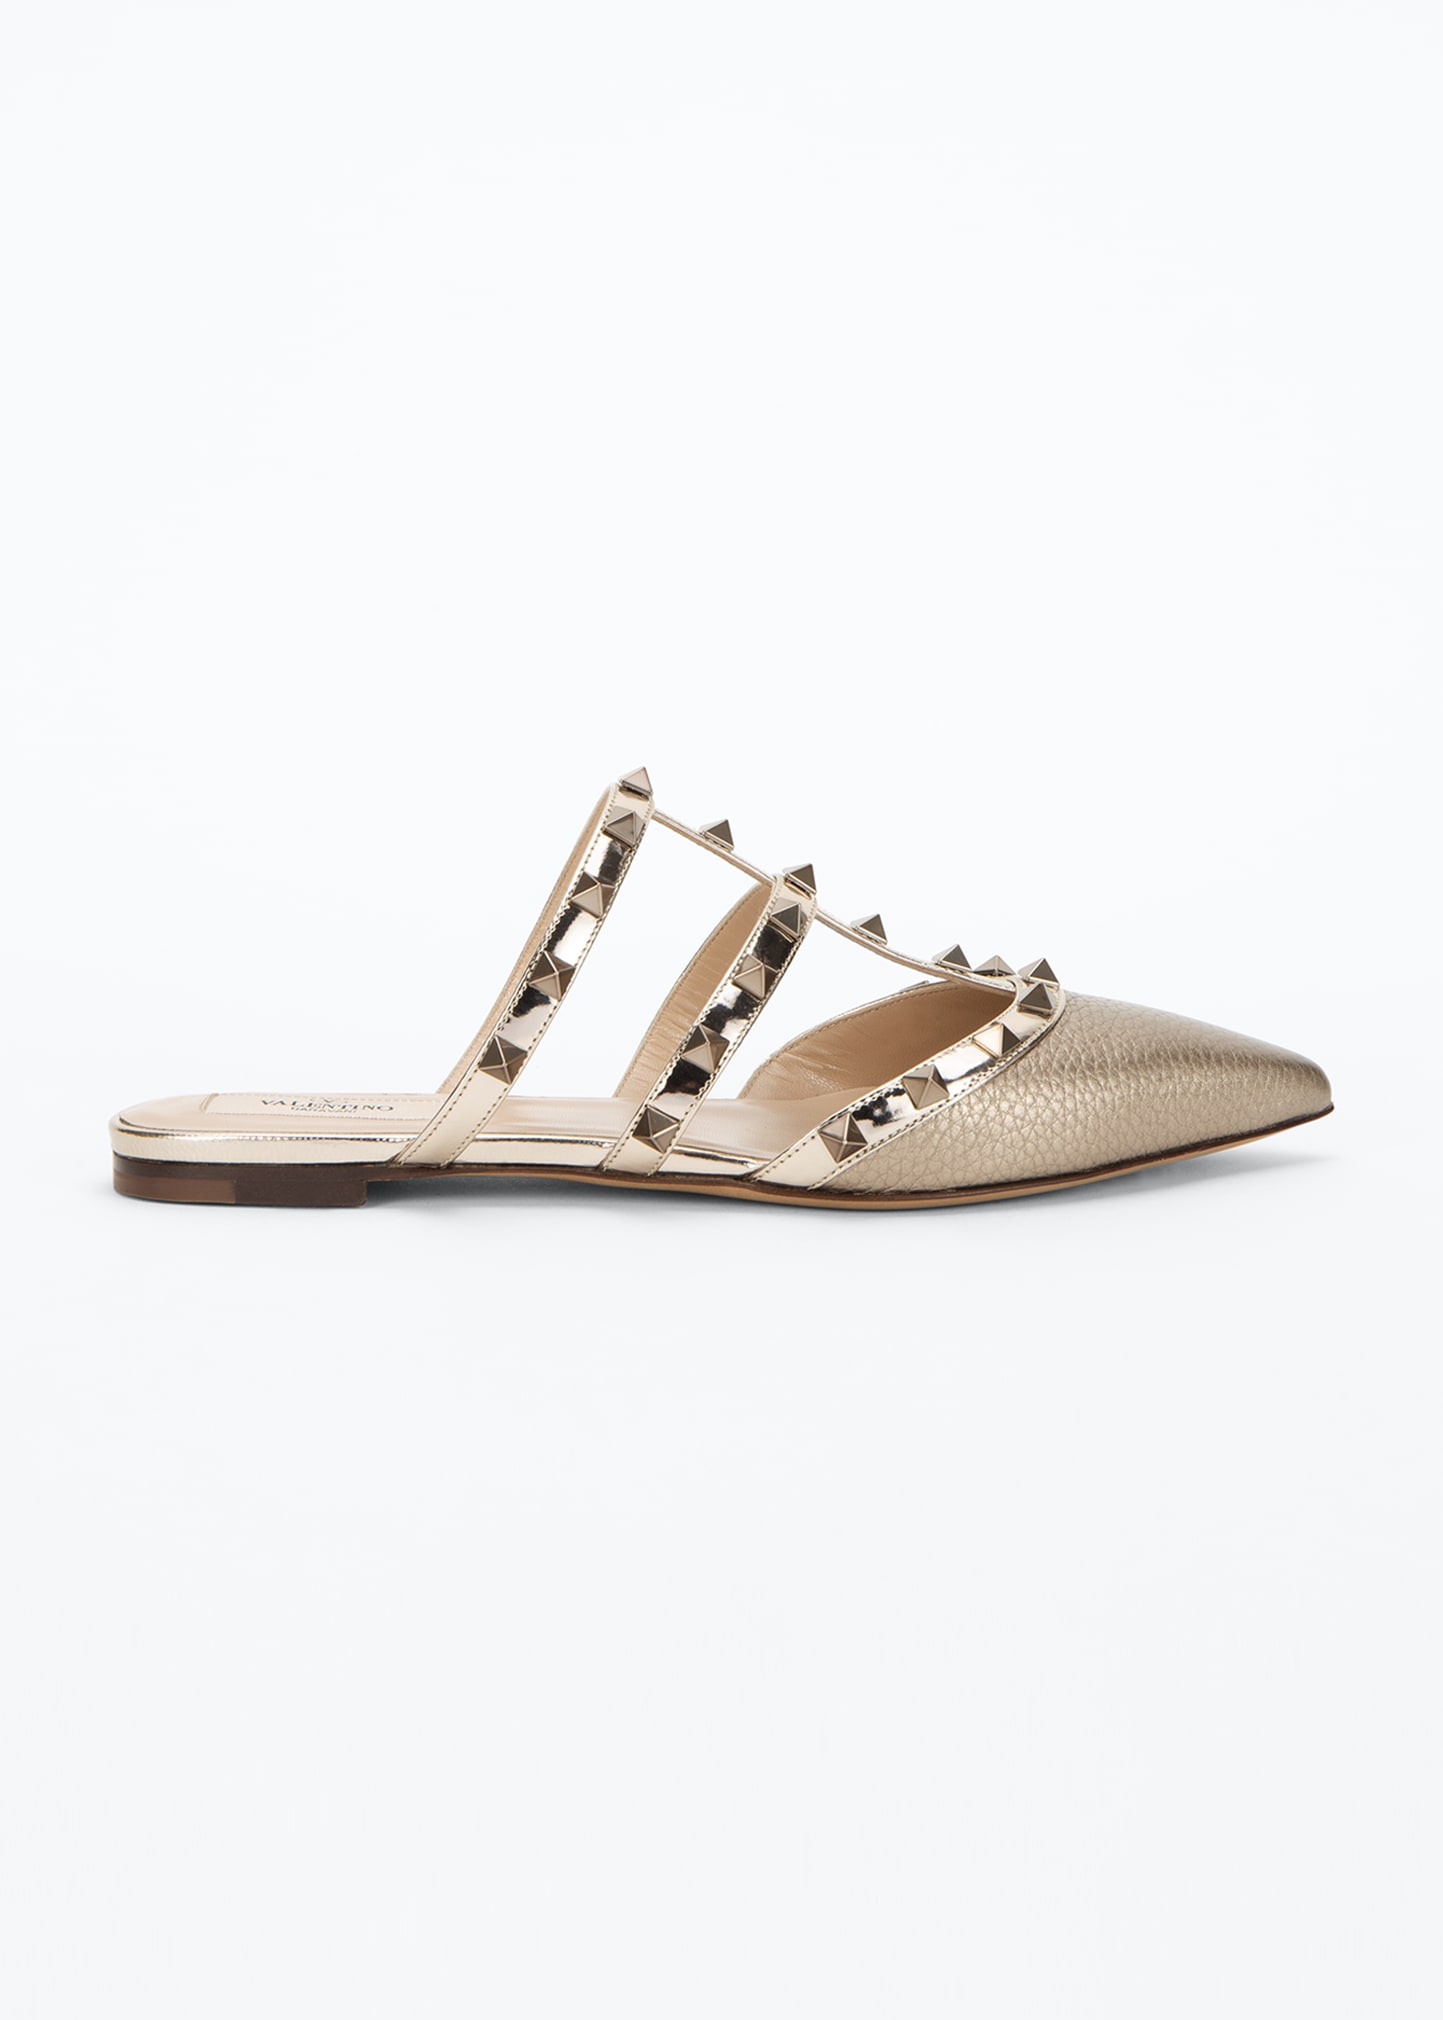 valentino shoes sandals